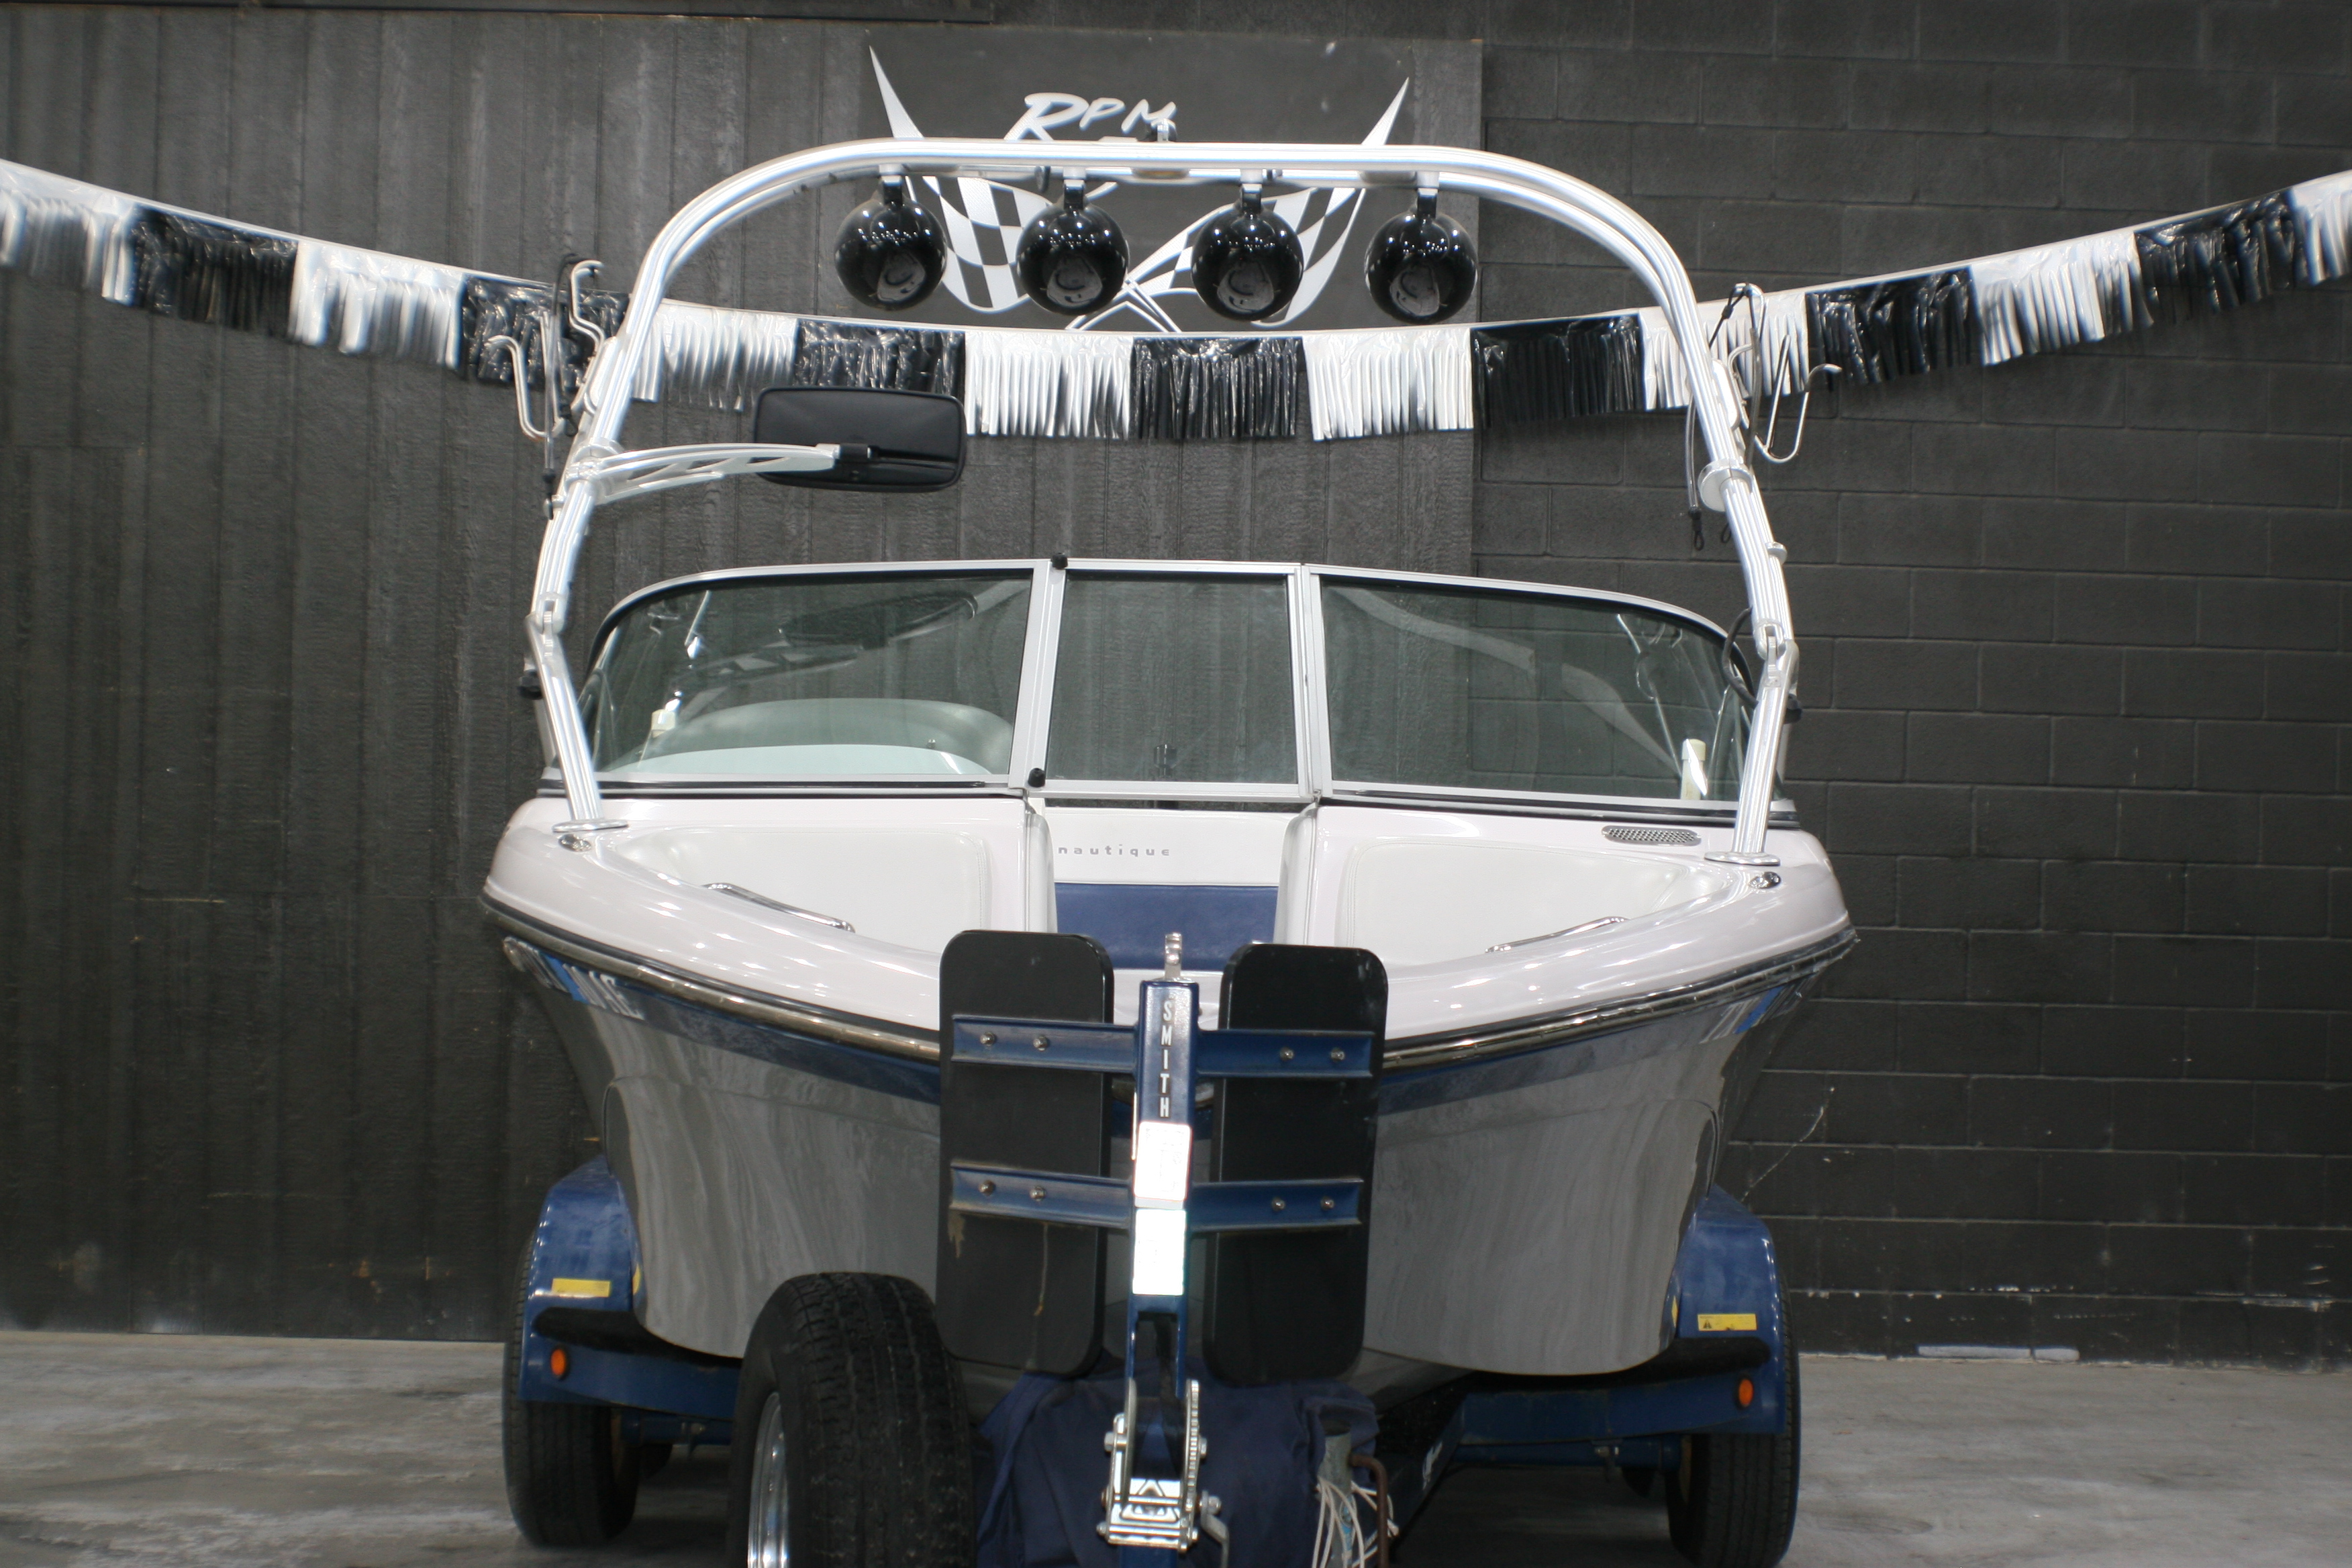 2006 Correct craft SV211TE Power boat for sale in McQueeney, TX - image 2 